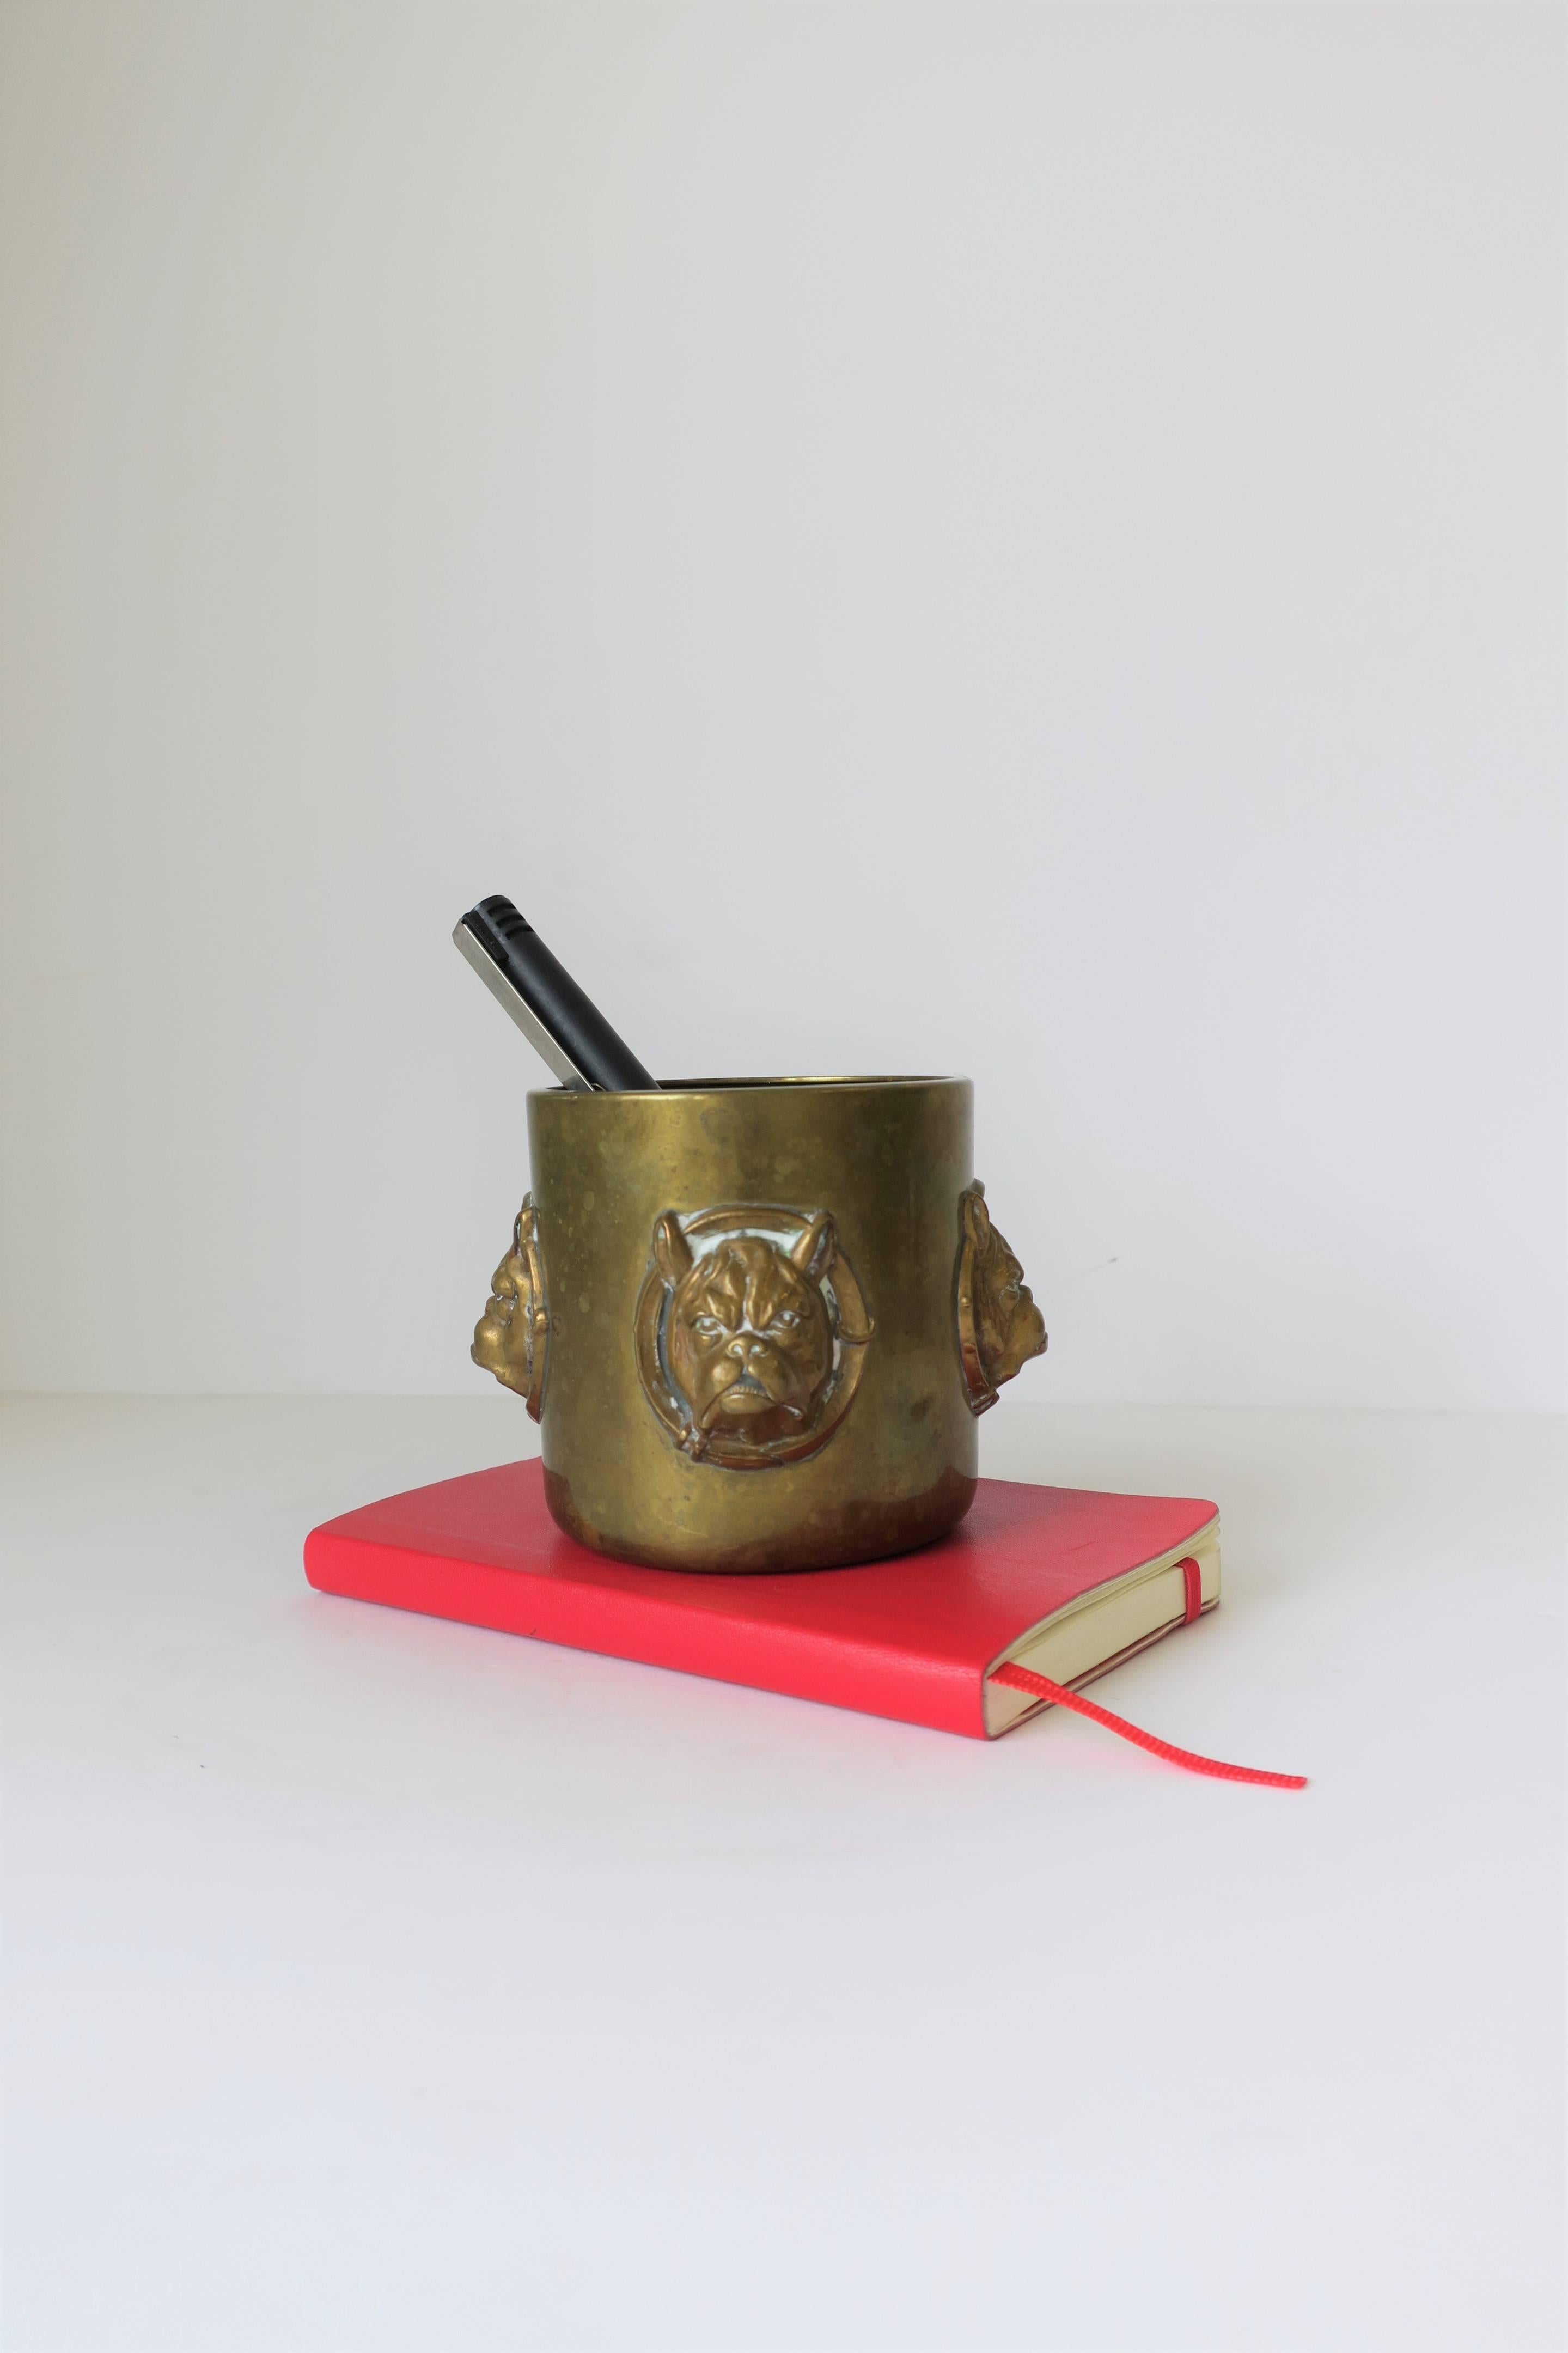 20th Century Brass Cup with Bulldog Face Sculpture